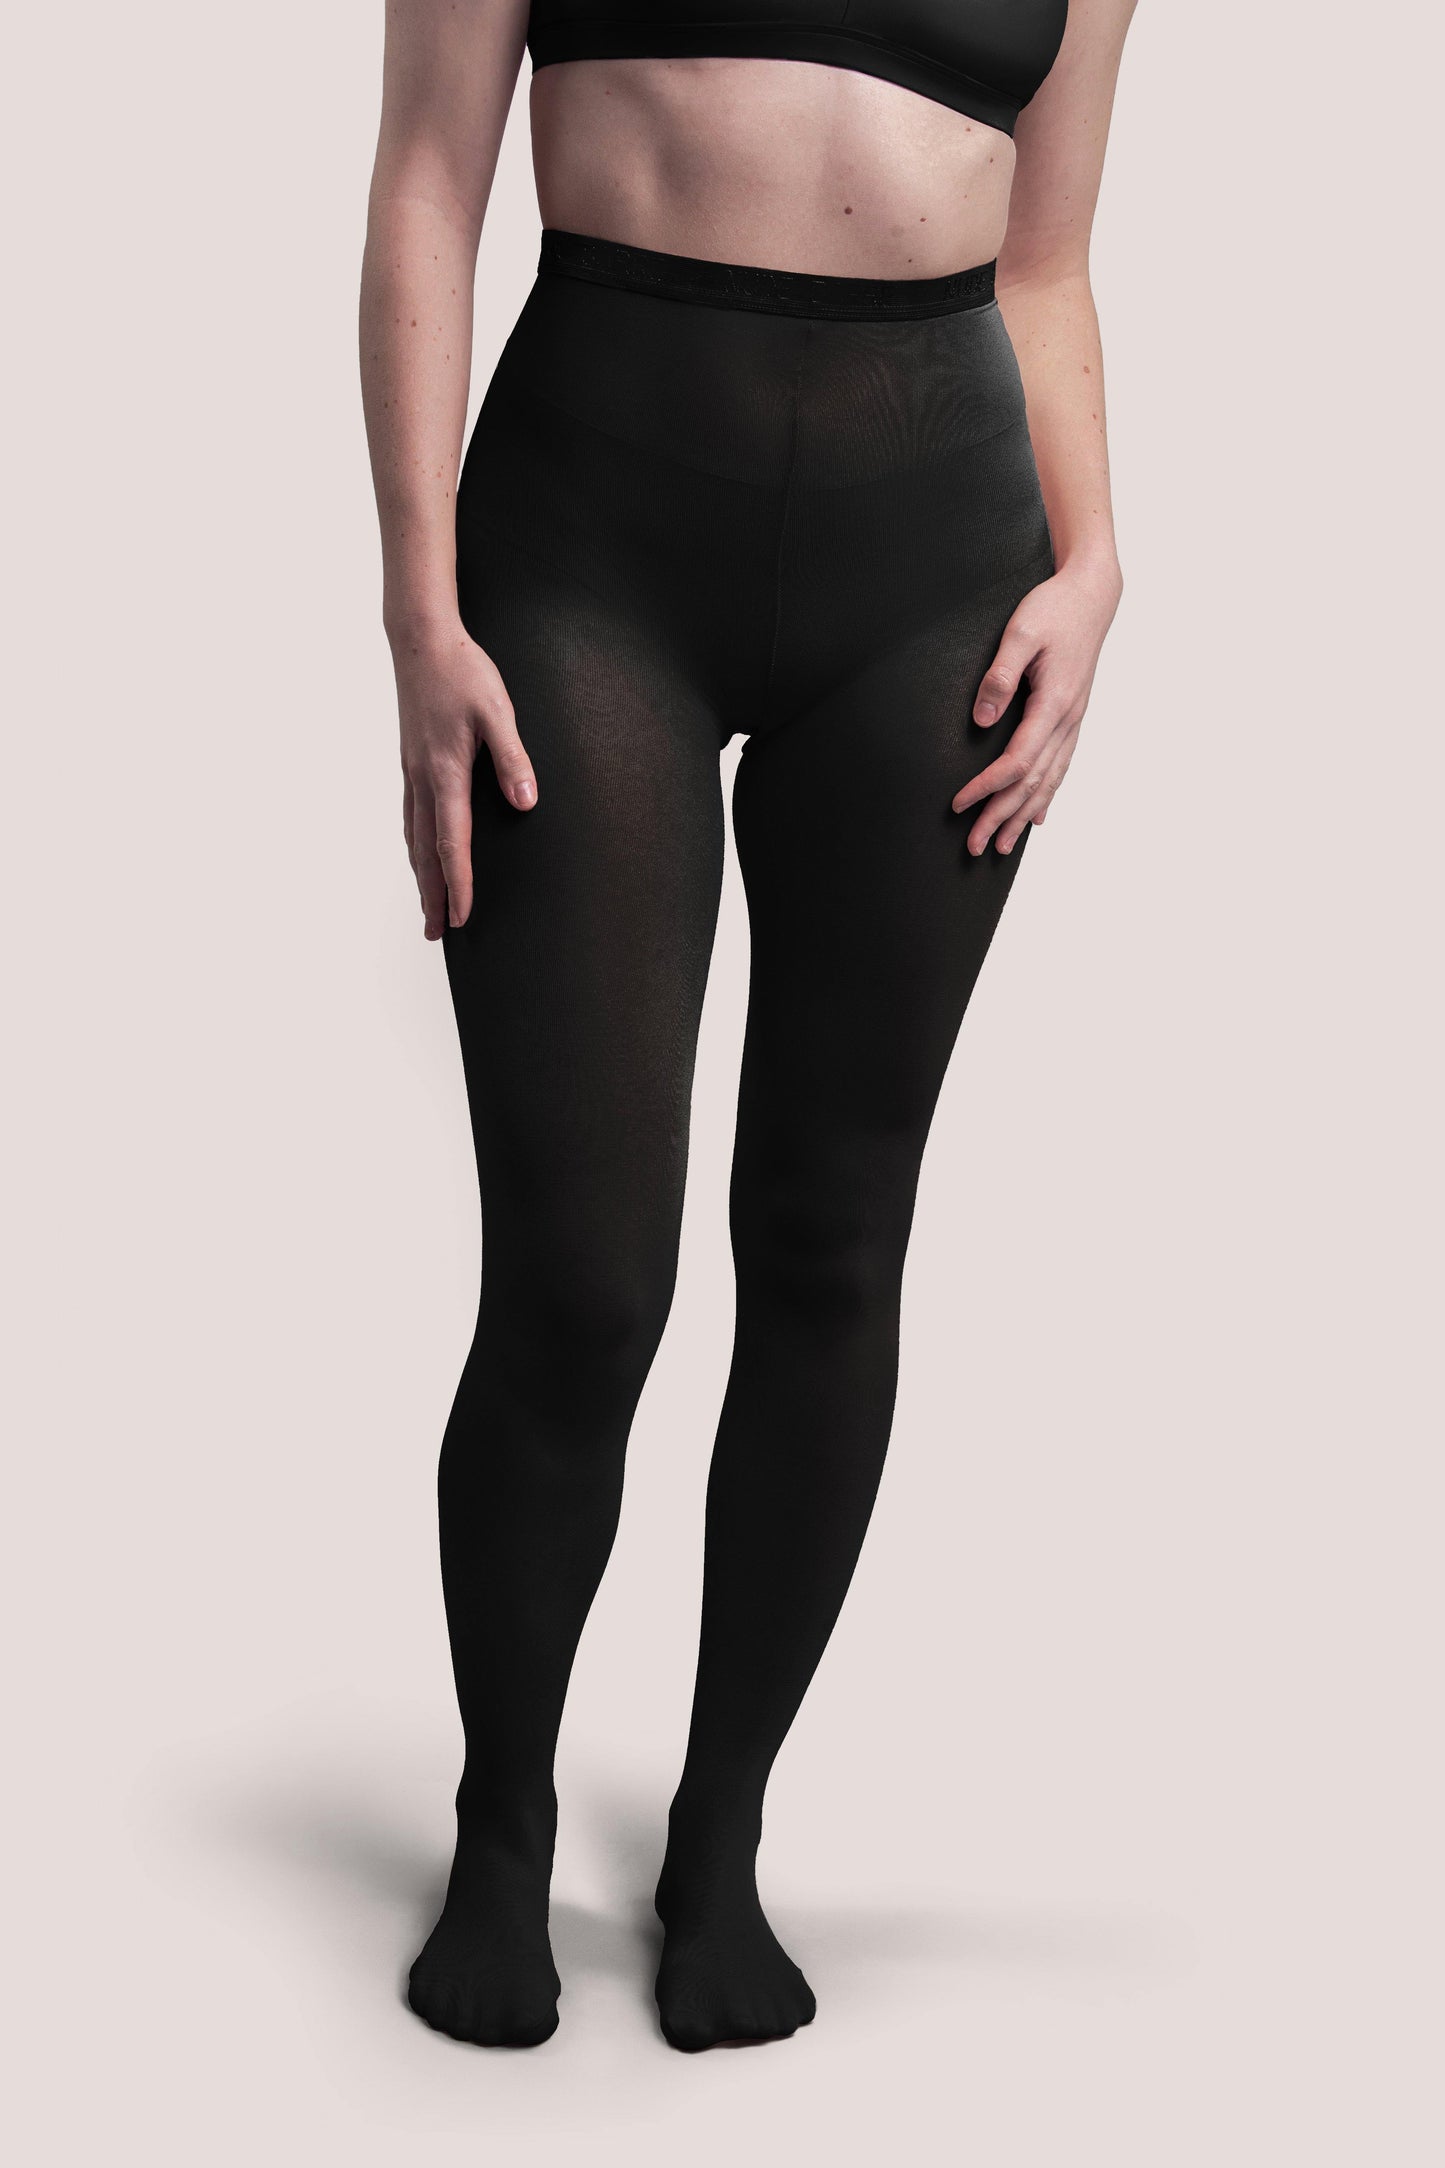 Children's Footed Opaque Tights